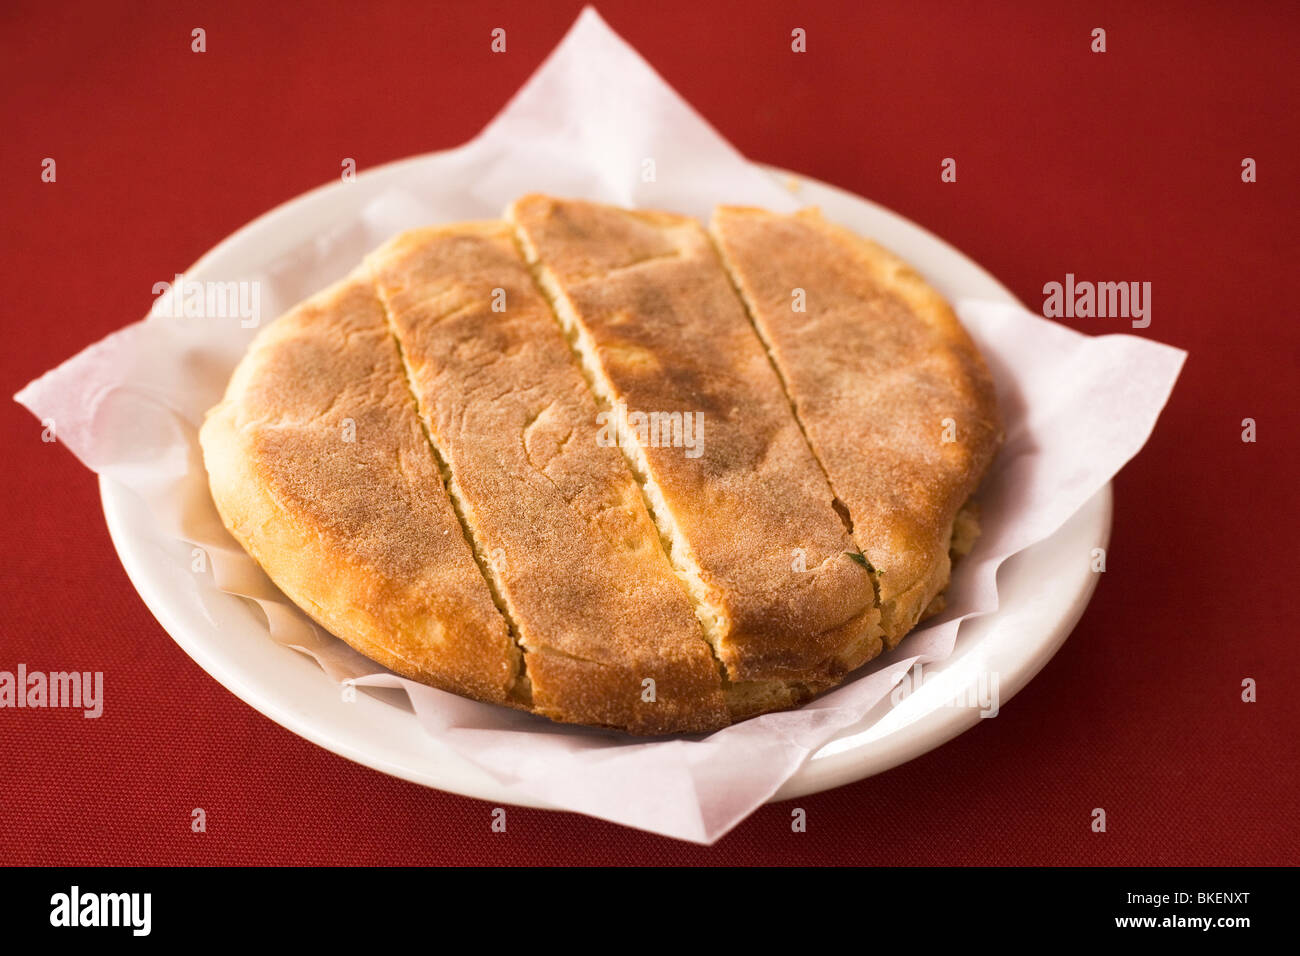 Traditional Madeiran flat bread, Bolo do caco, is served as garlic bread in a cafe in Funchal, Madeira. Stock Photo